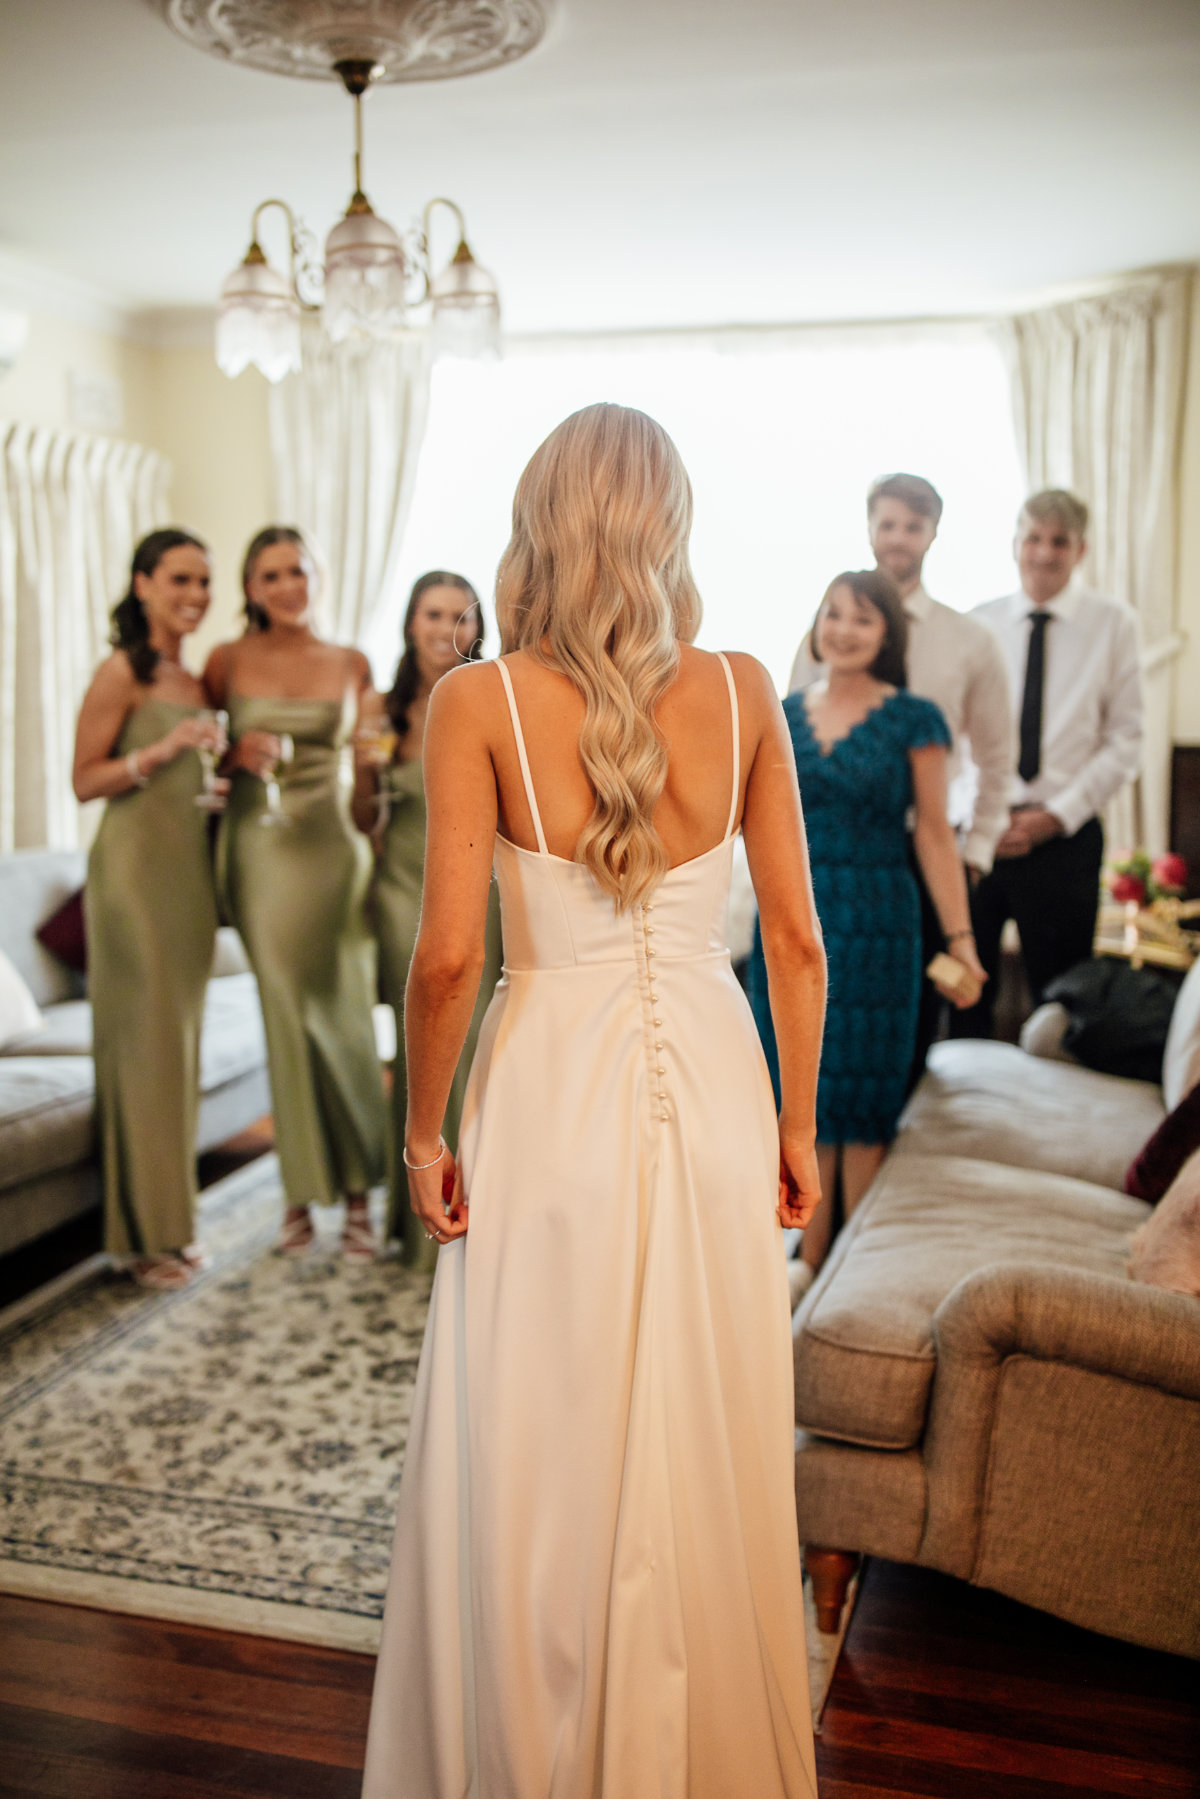 Jade and Joel's wedding at The Riverstone Estate photographed by Liz Barnes